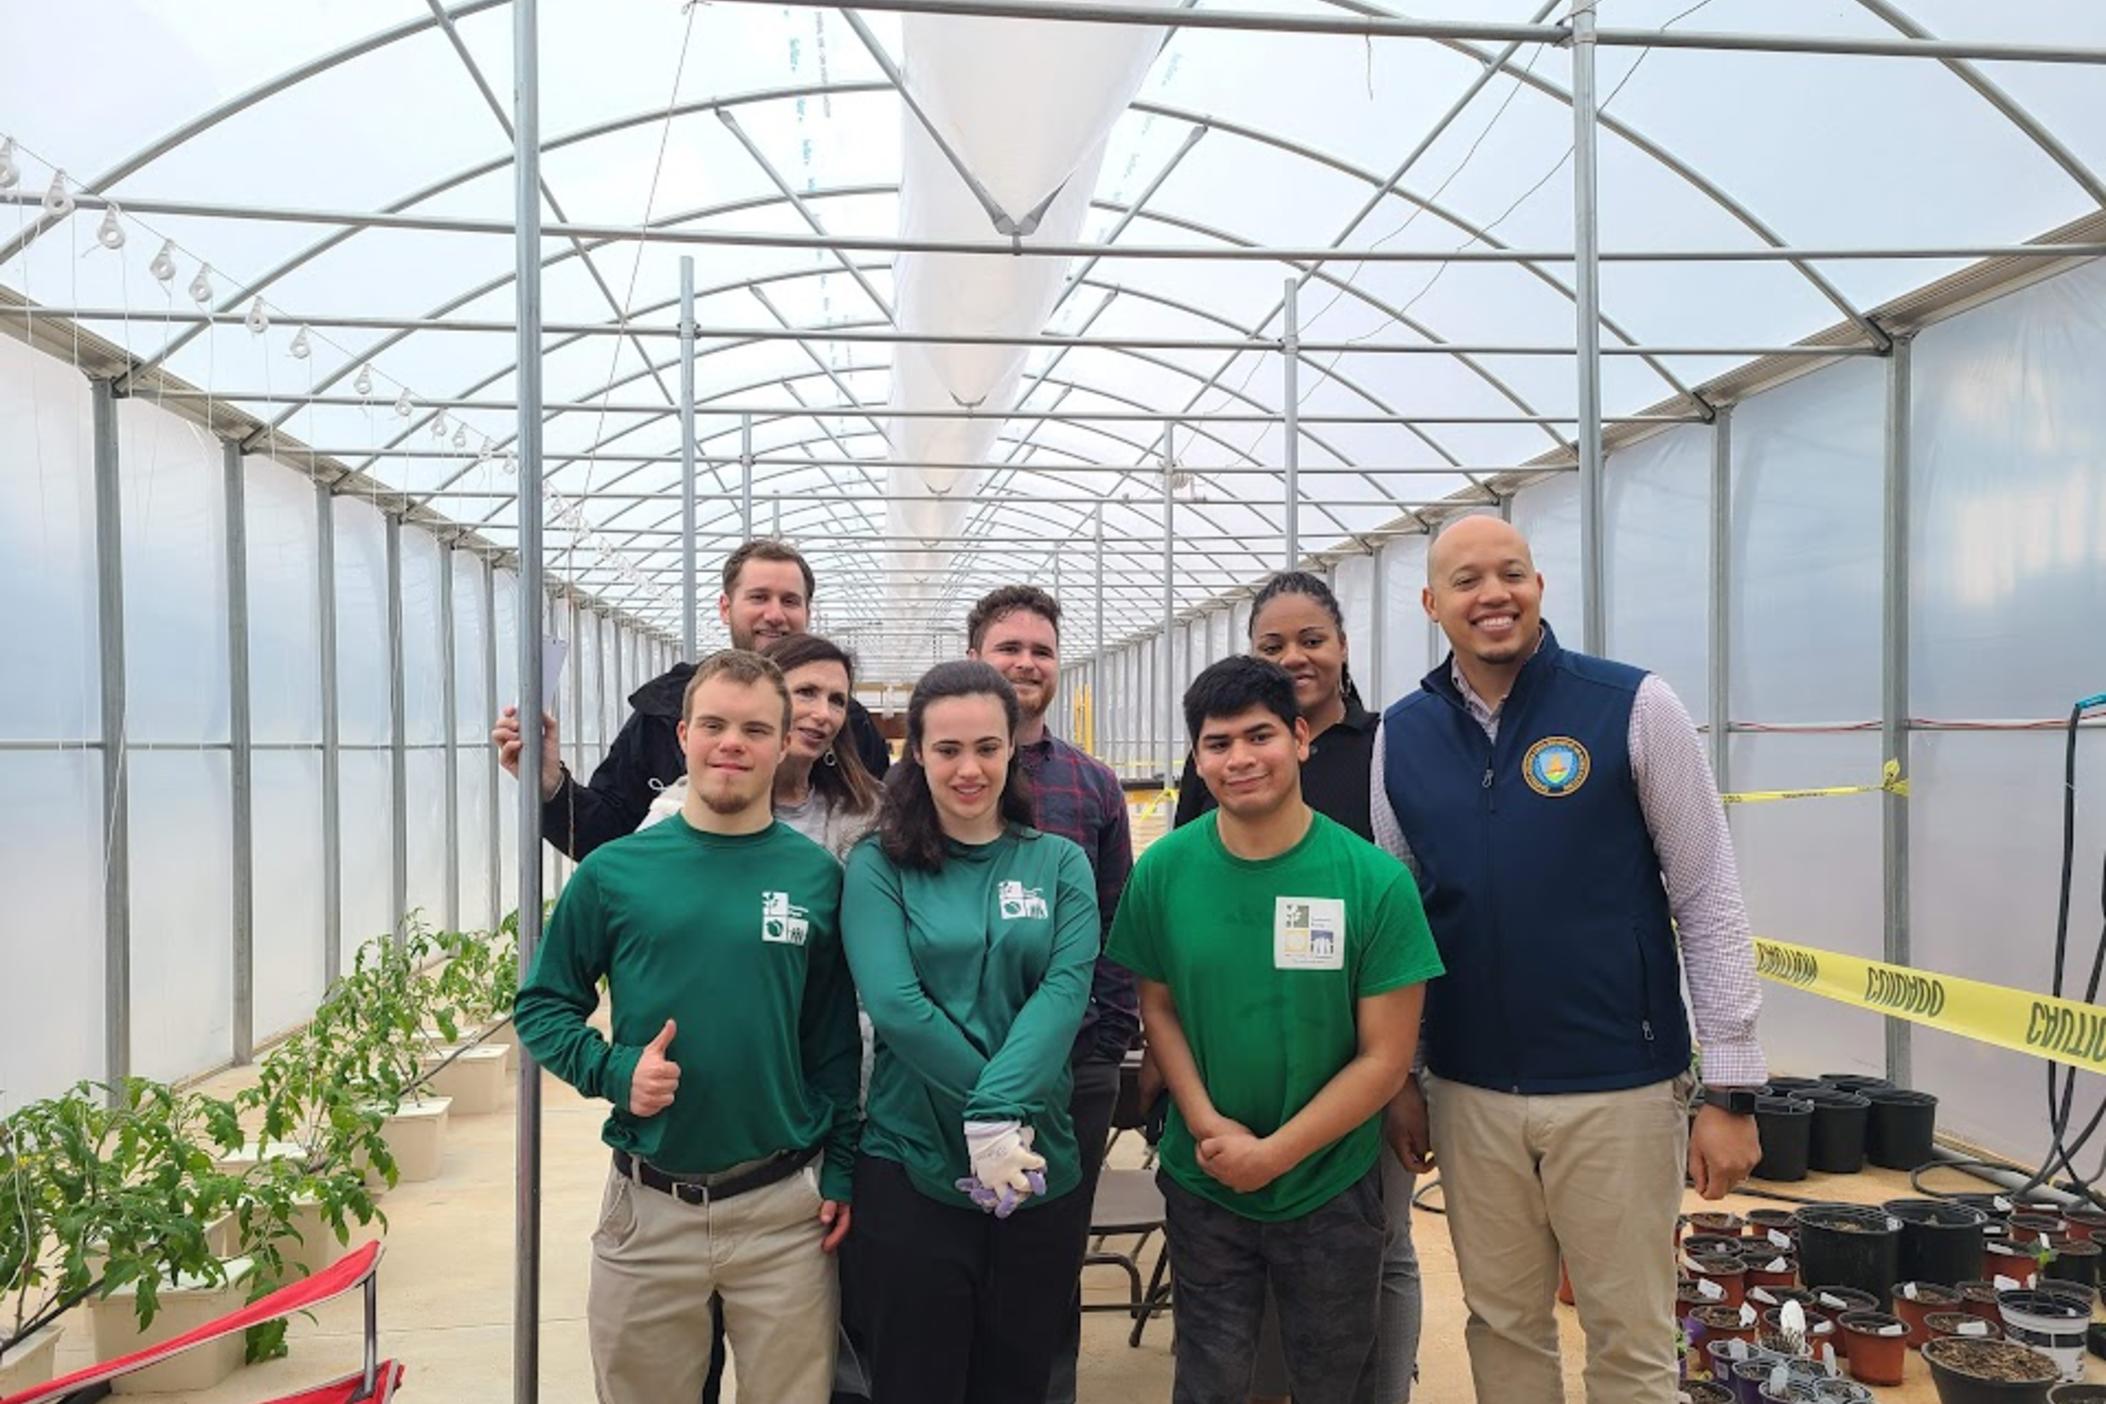 John, Qwen, and Joey wearing the green Peachtree Farms uniform stand in the greenhouse on the farm.